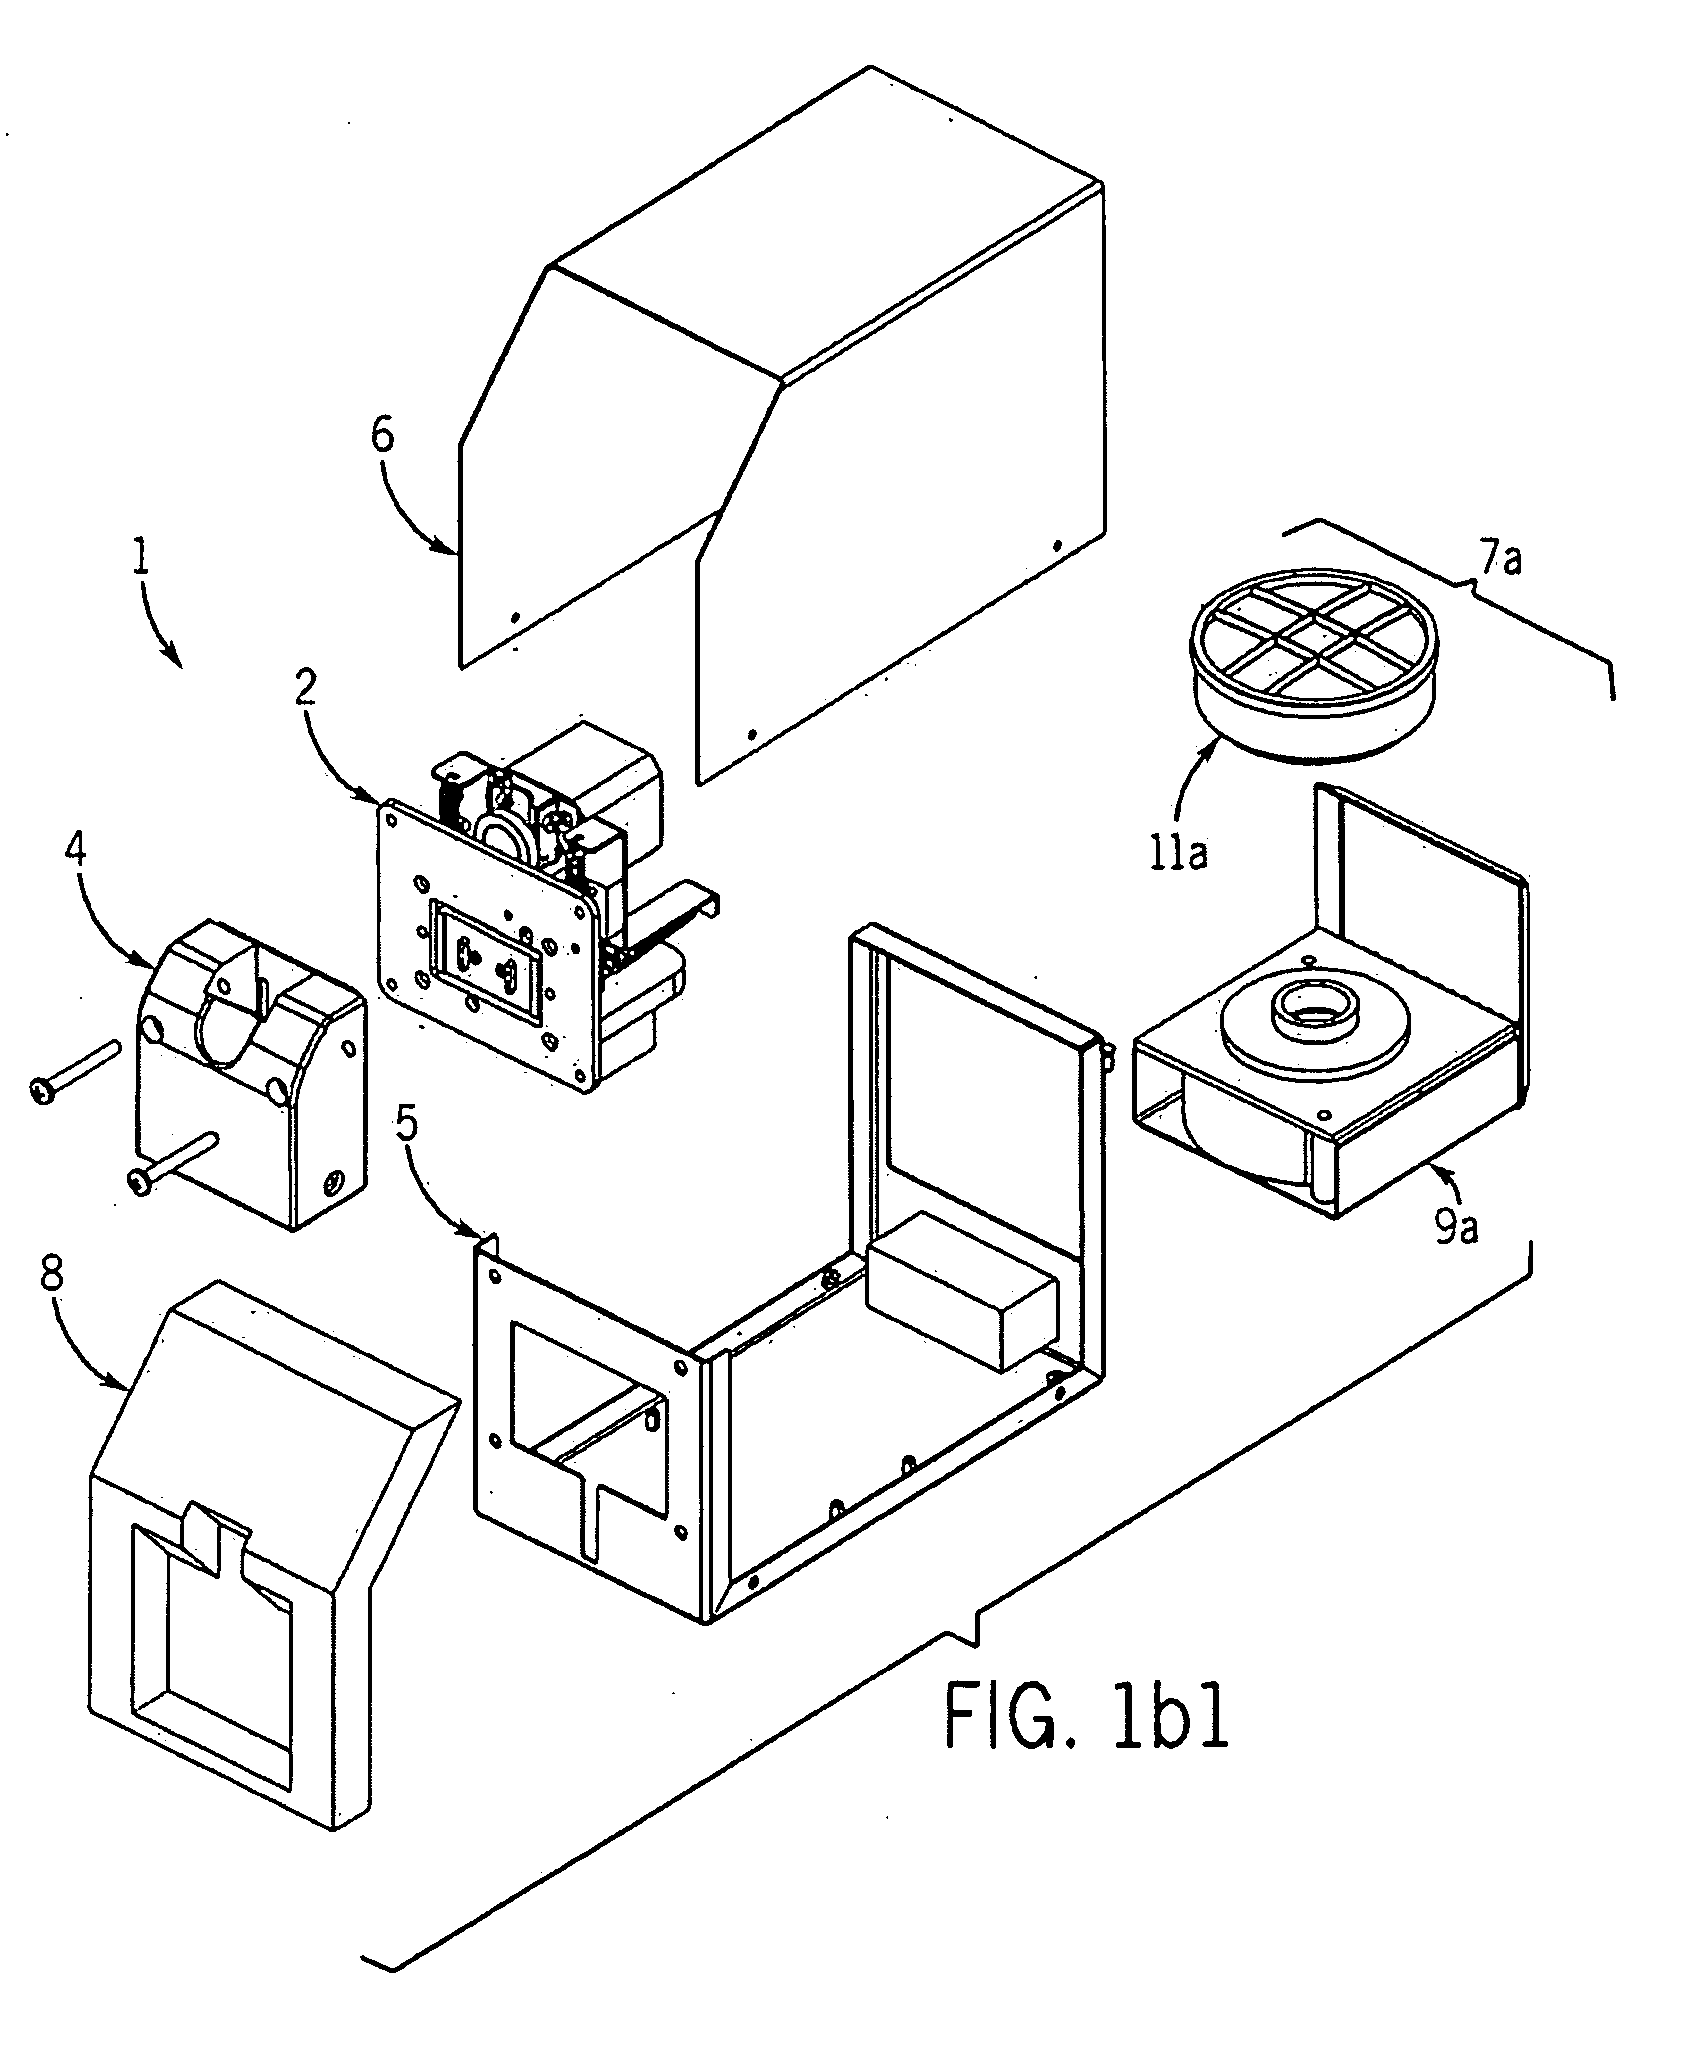 Device for Attaching a Label to a Substrate